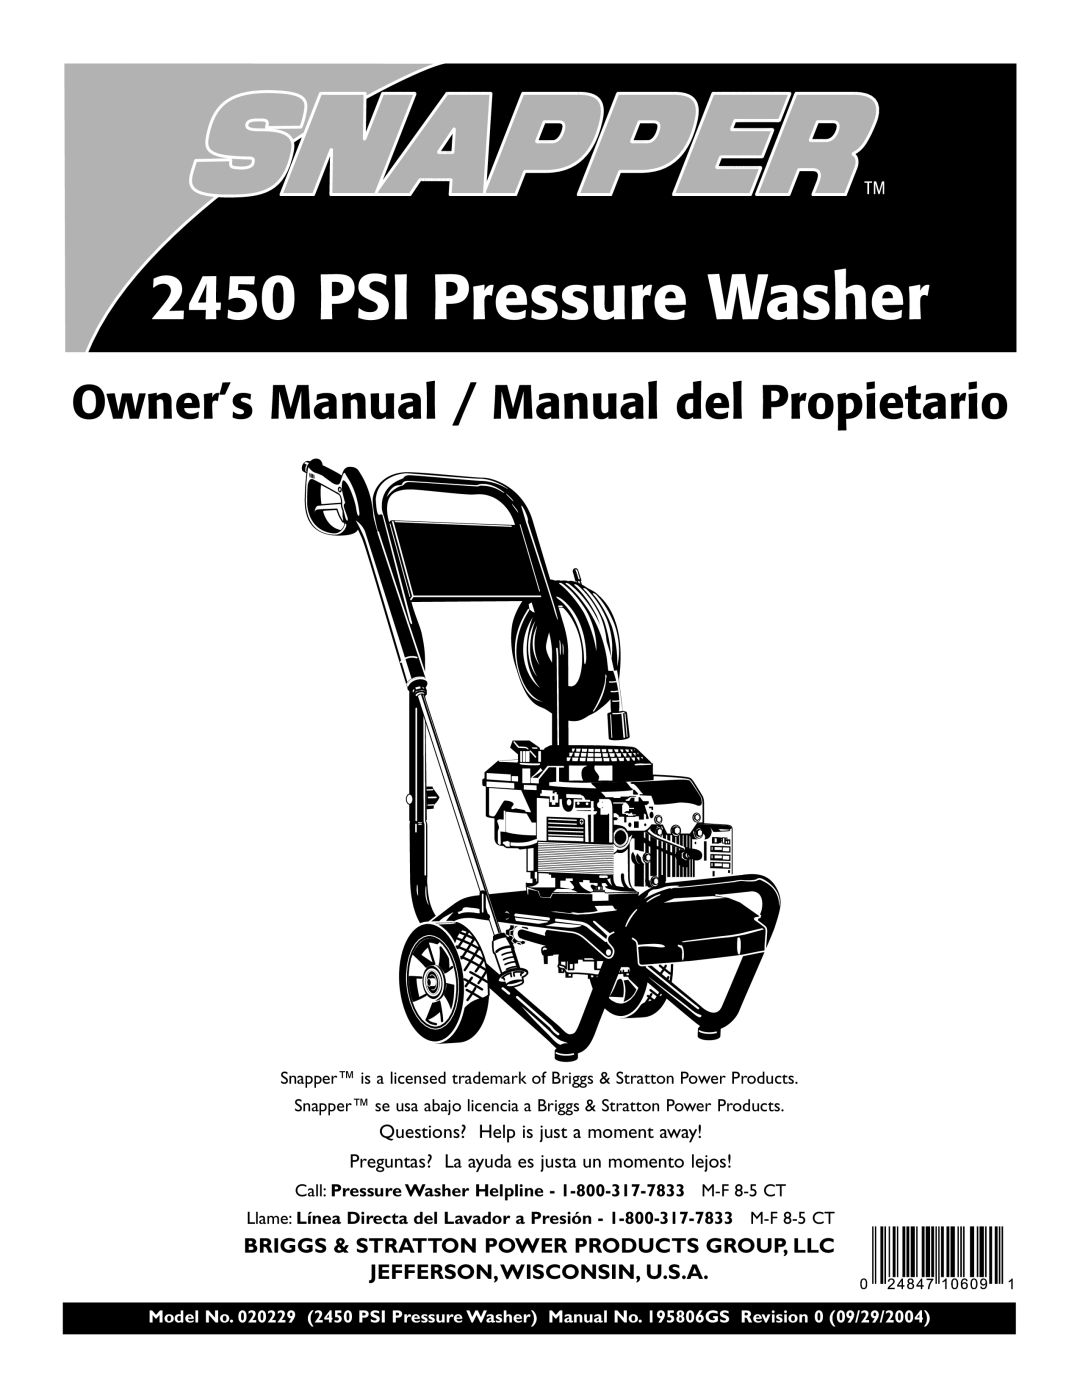 Snapper 020229 owner manual Briggs & Stratton Power Products Group, Llc, Jefferson,Wisconsin, U.S.A, PSI Pressure Washer 